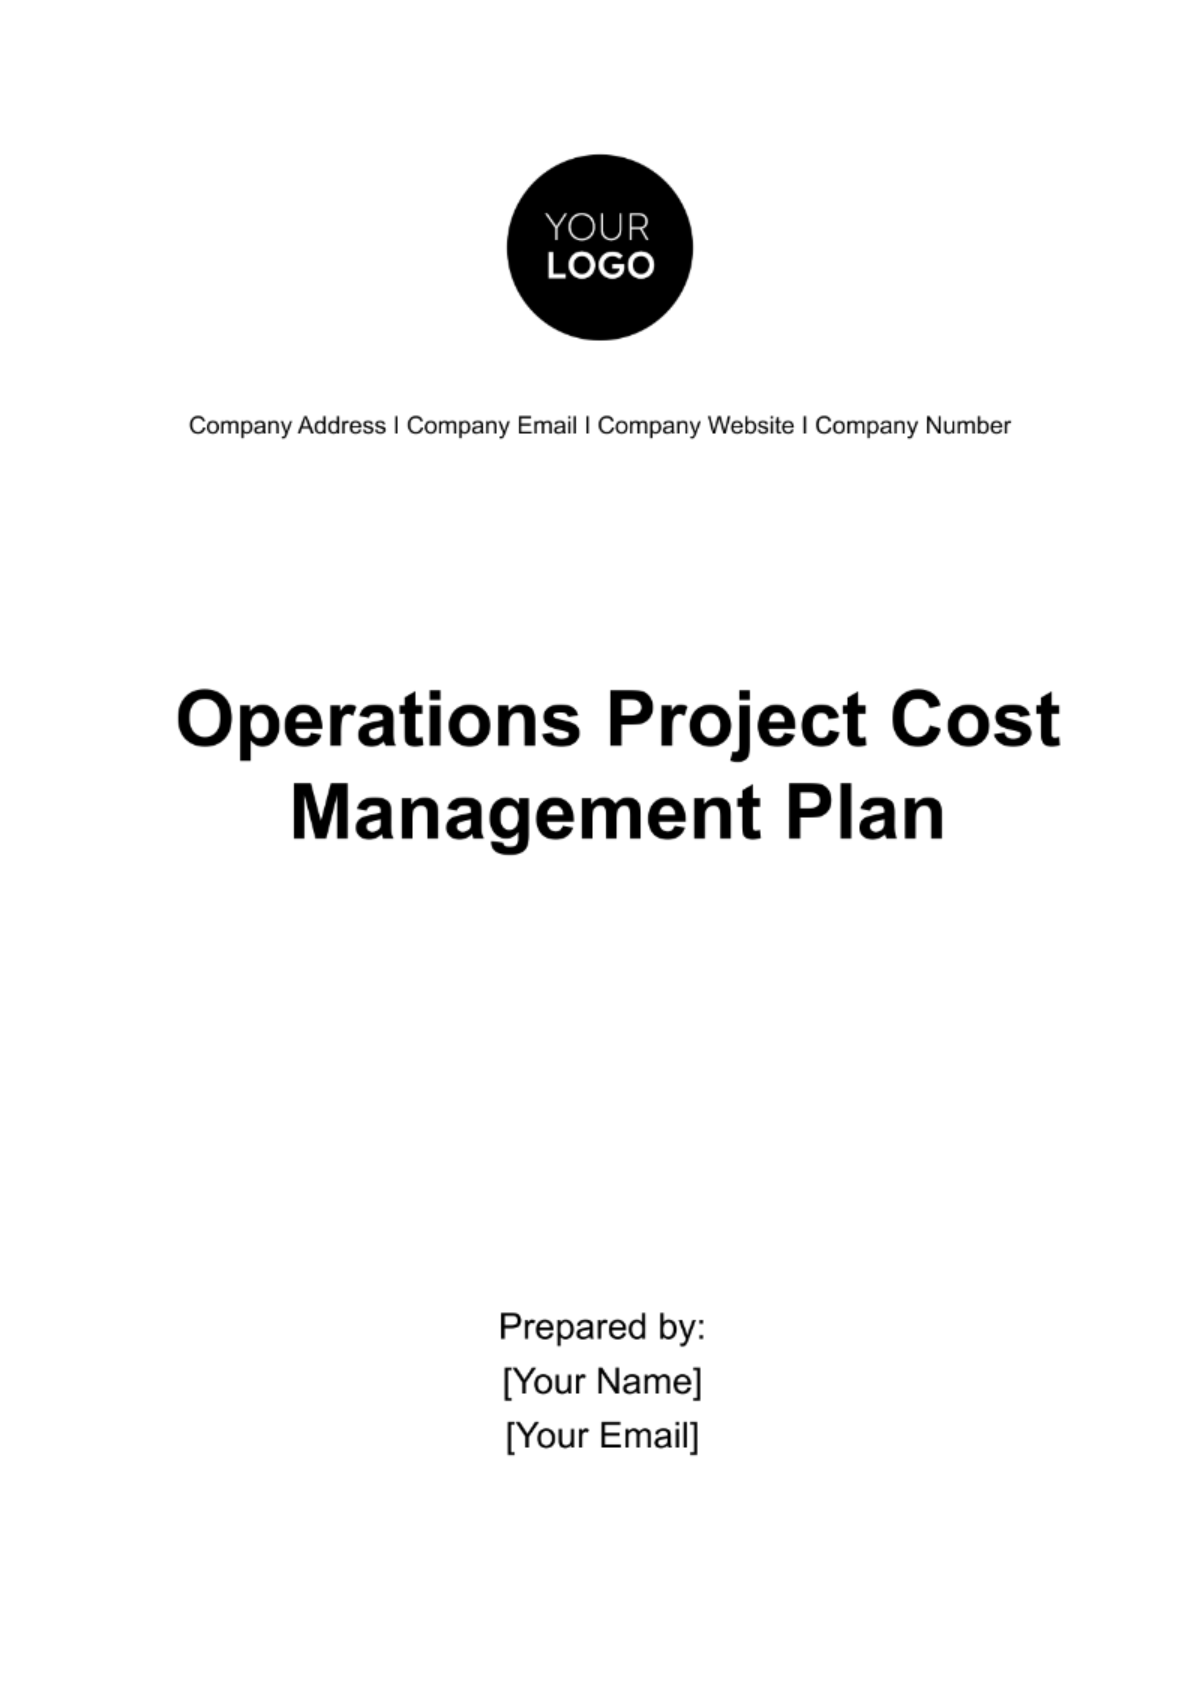 Operations Project Cost Management Plan Template